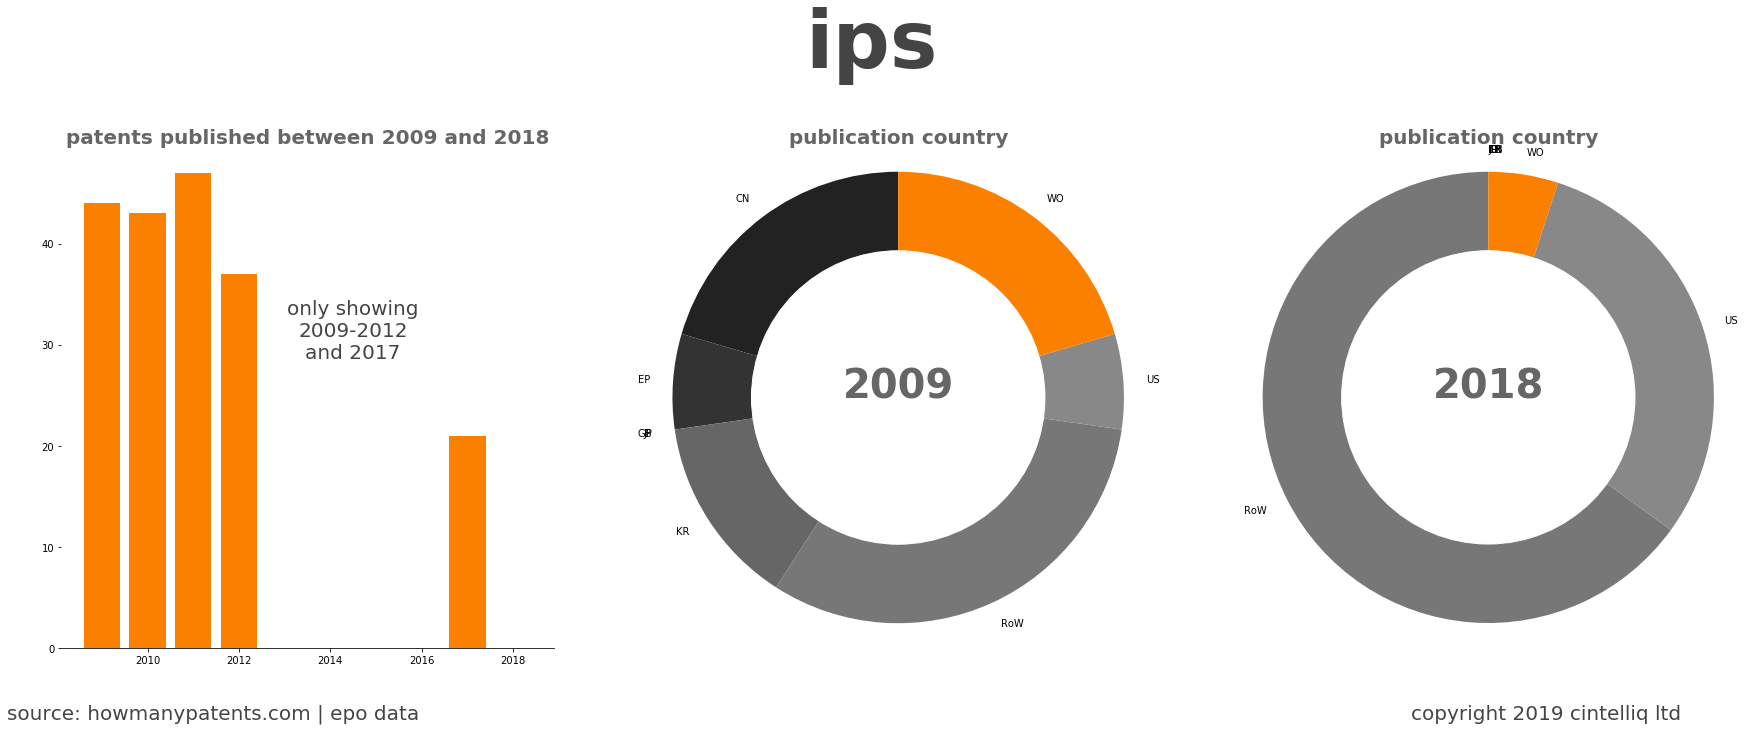 summary of patents for Ips